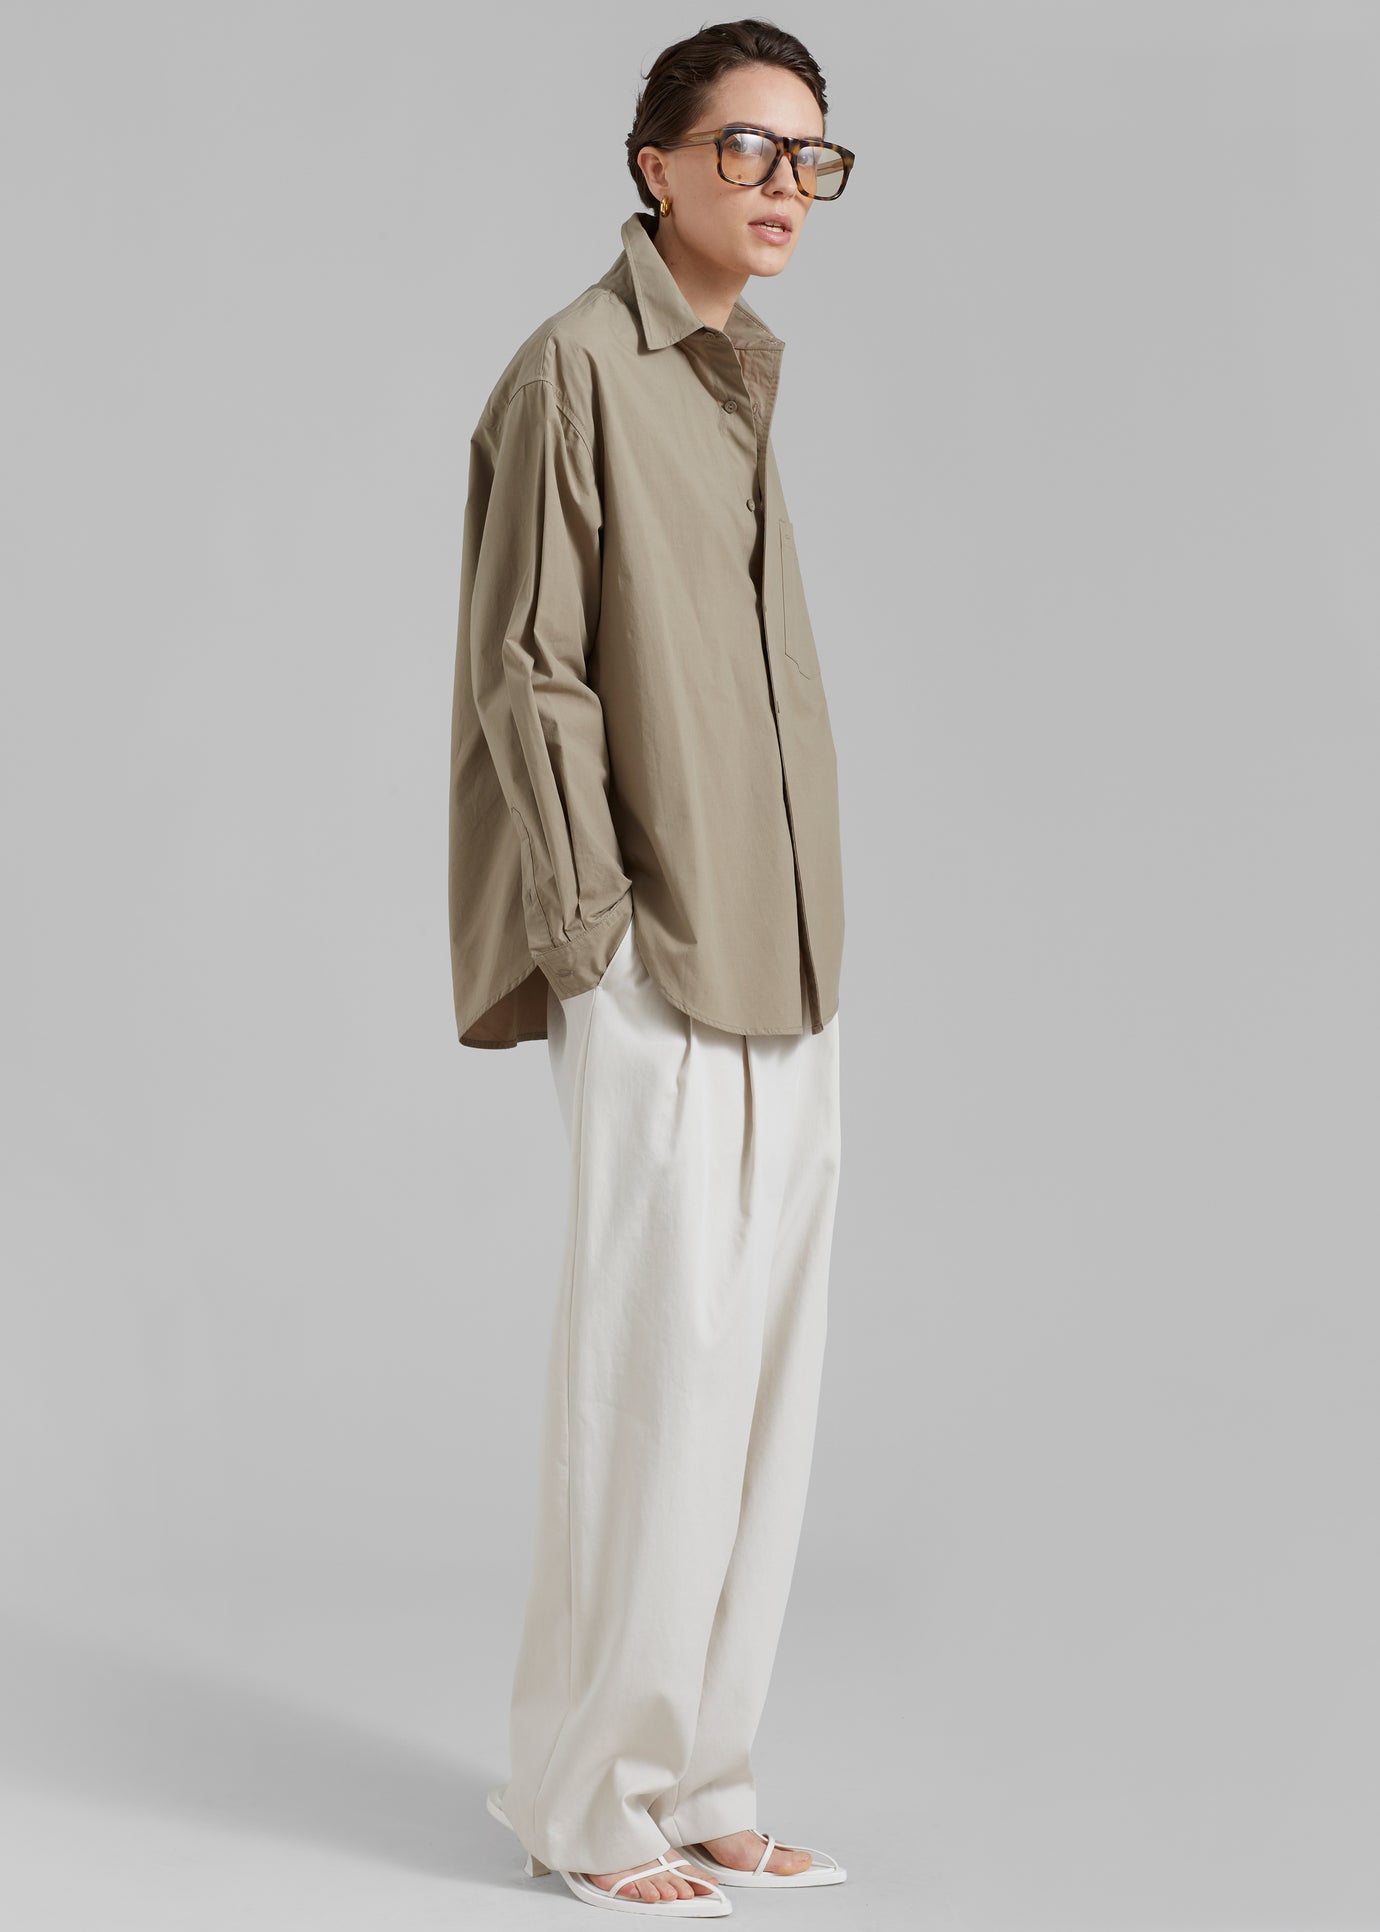 Matteau Relaxed Shirt - Taupe